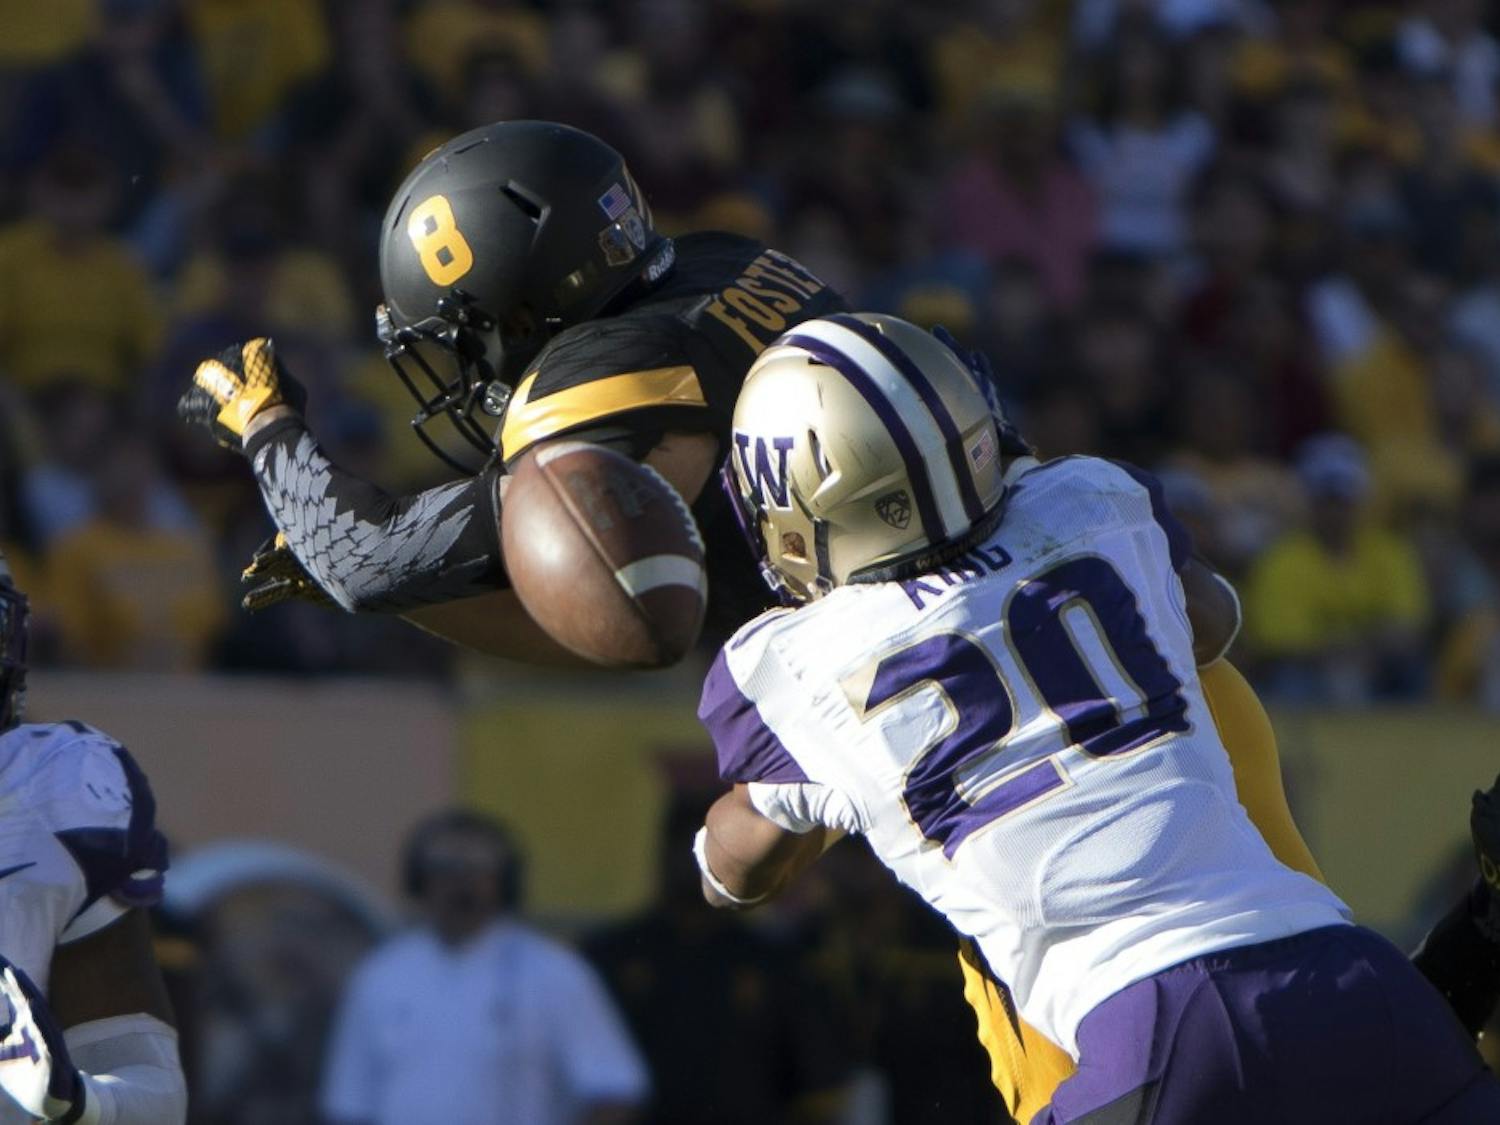 Senior wide receiver D.J. Foster (8) attempts to catch a pass in the fourth quarter against Washington on Saturday, Nov. 14, 2015, at Sun Devil Stadium in Tempe. The Sun Devils defeated the Huskies 27-17. 